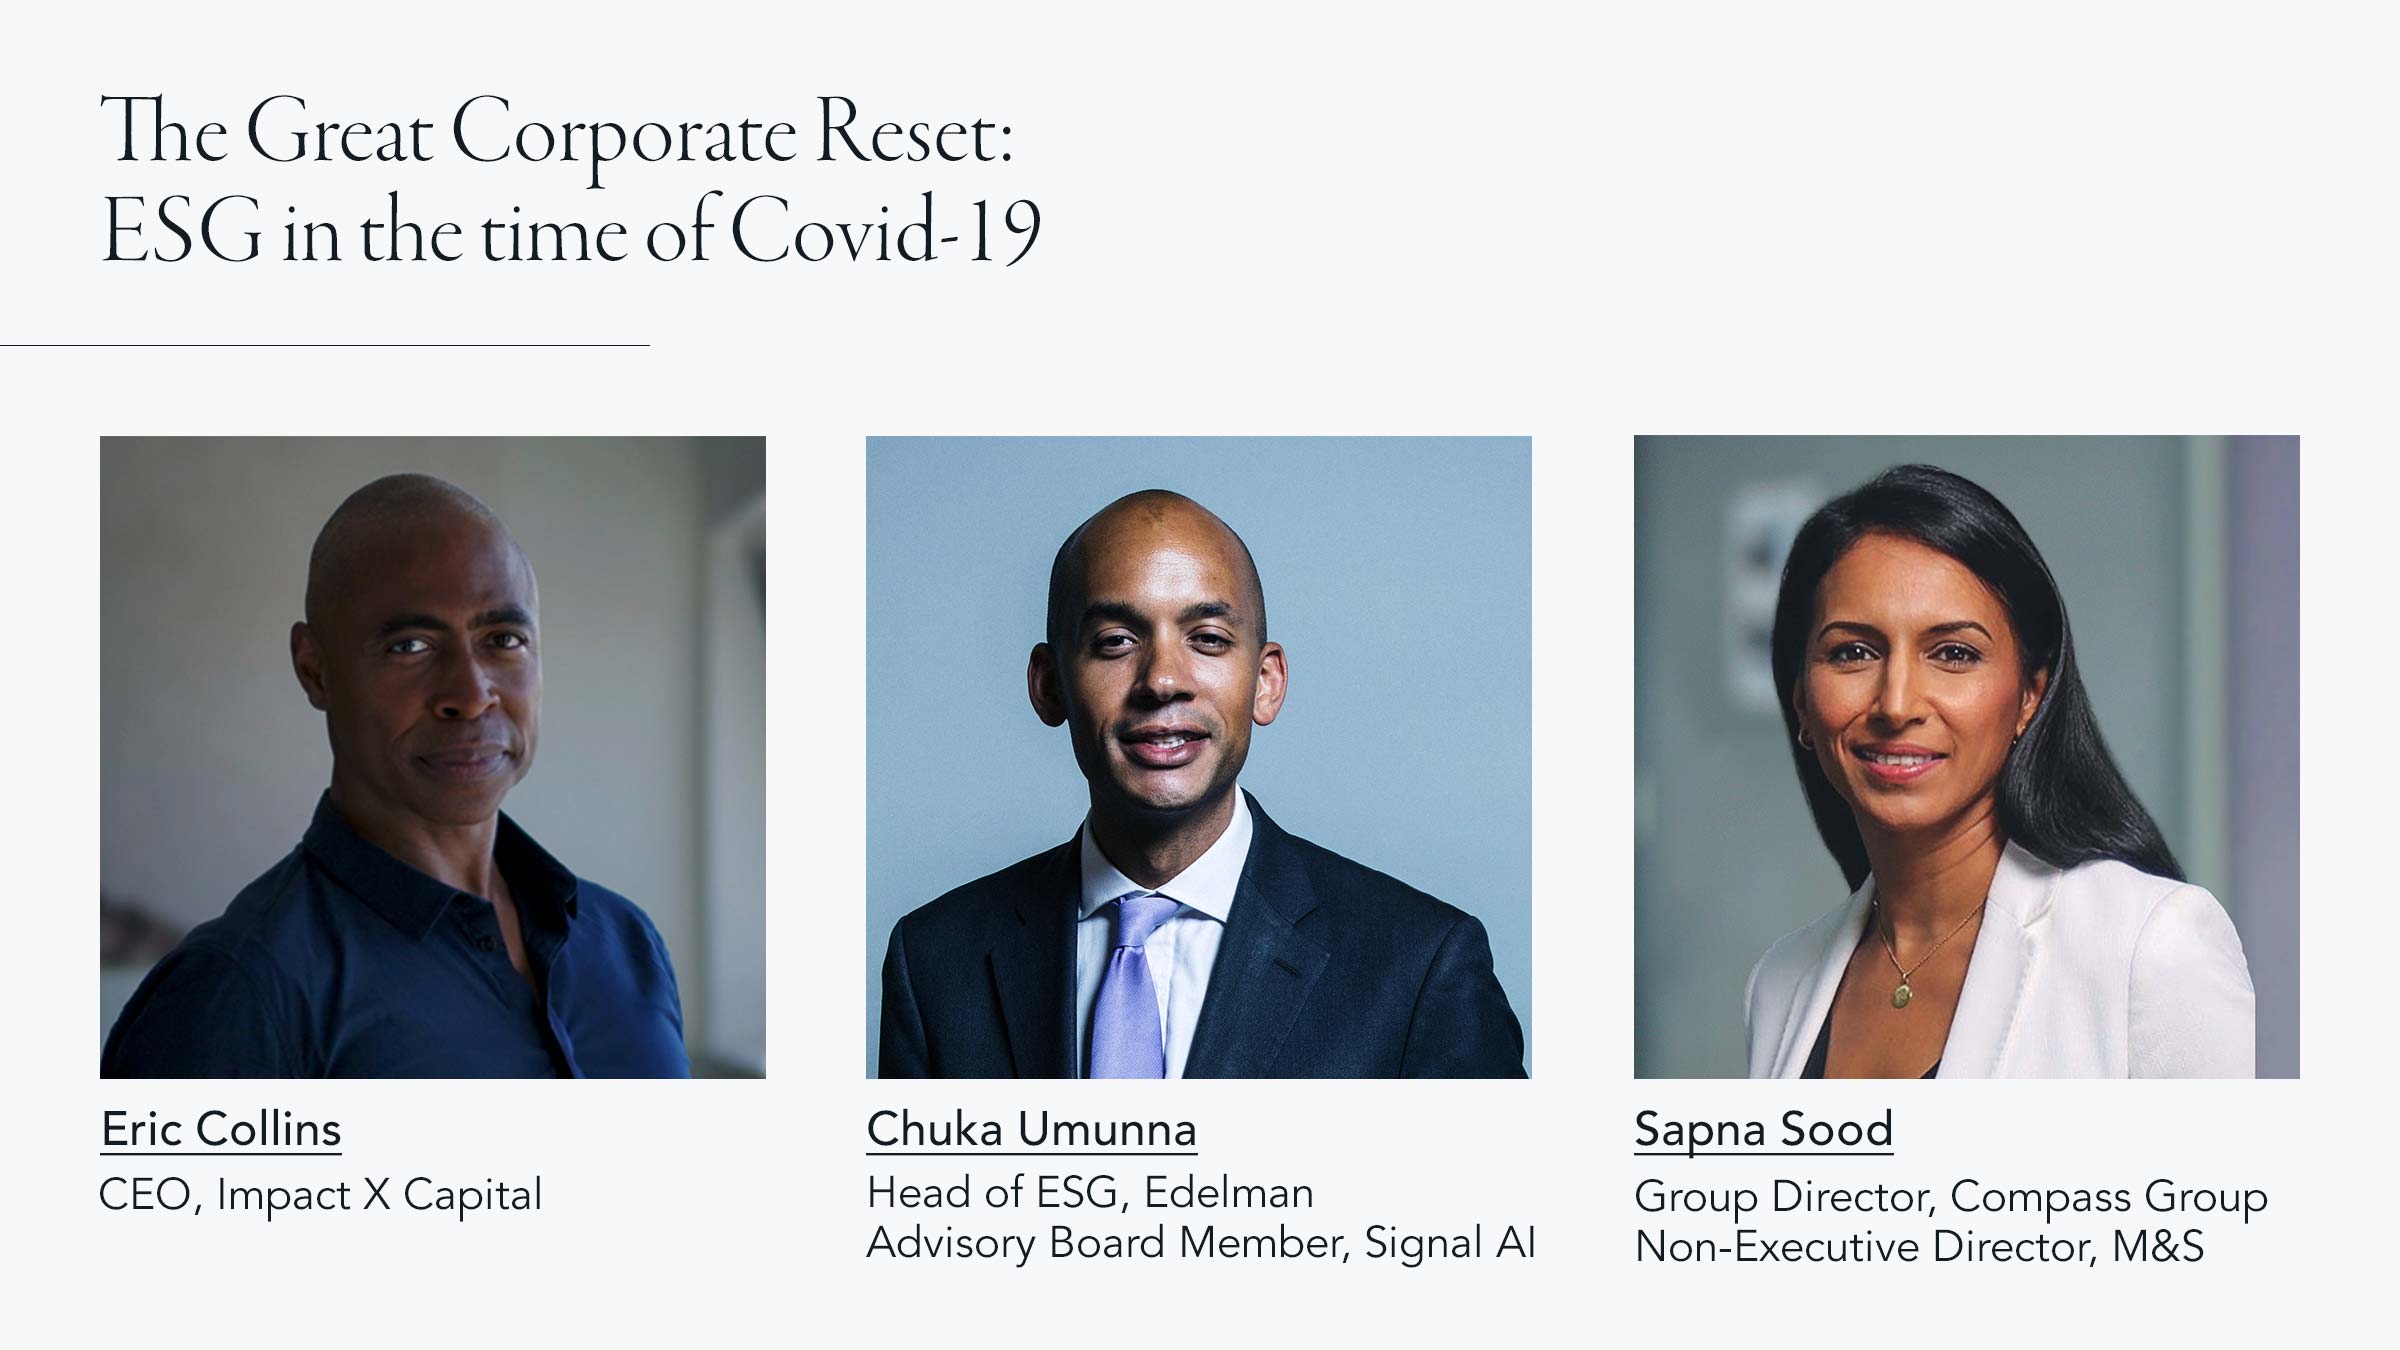 The panelists were Eric Collins, CEO and co-founder of Impact X Capital, Chuka Umunna, Head of ESG at Edelman and Sapna Sood, Group Director, International Clients & Markets at Compass Group.